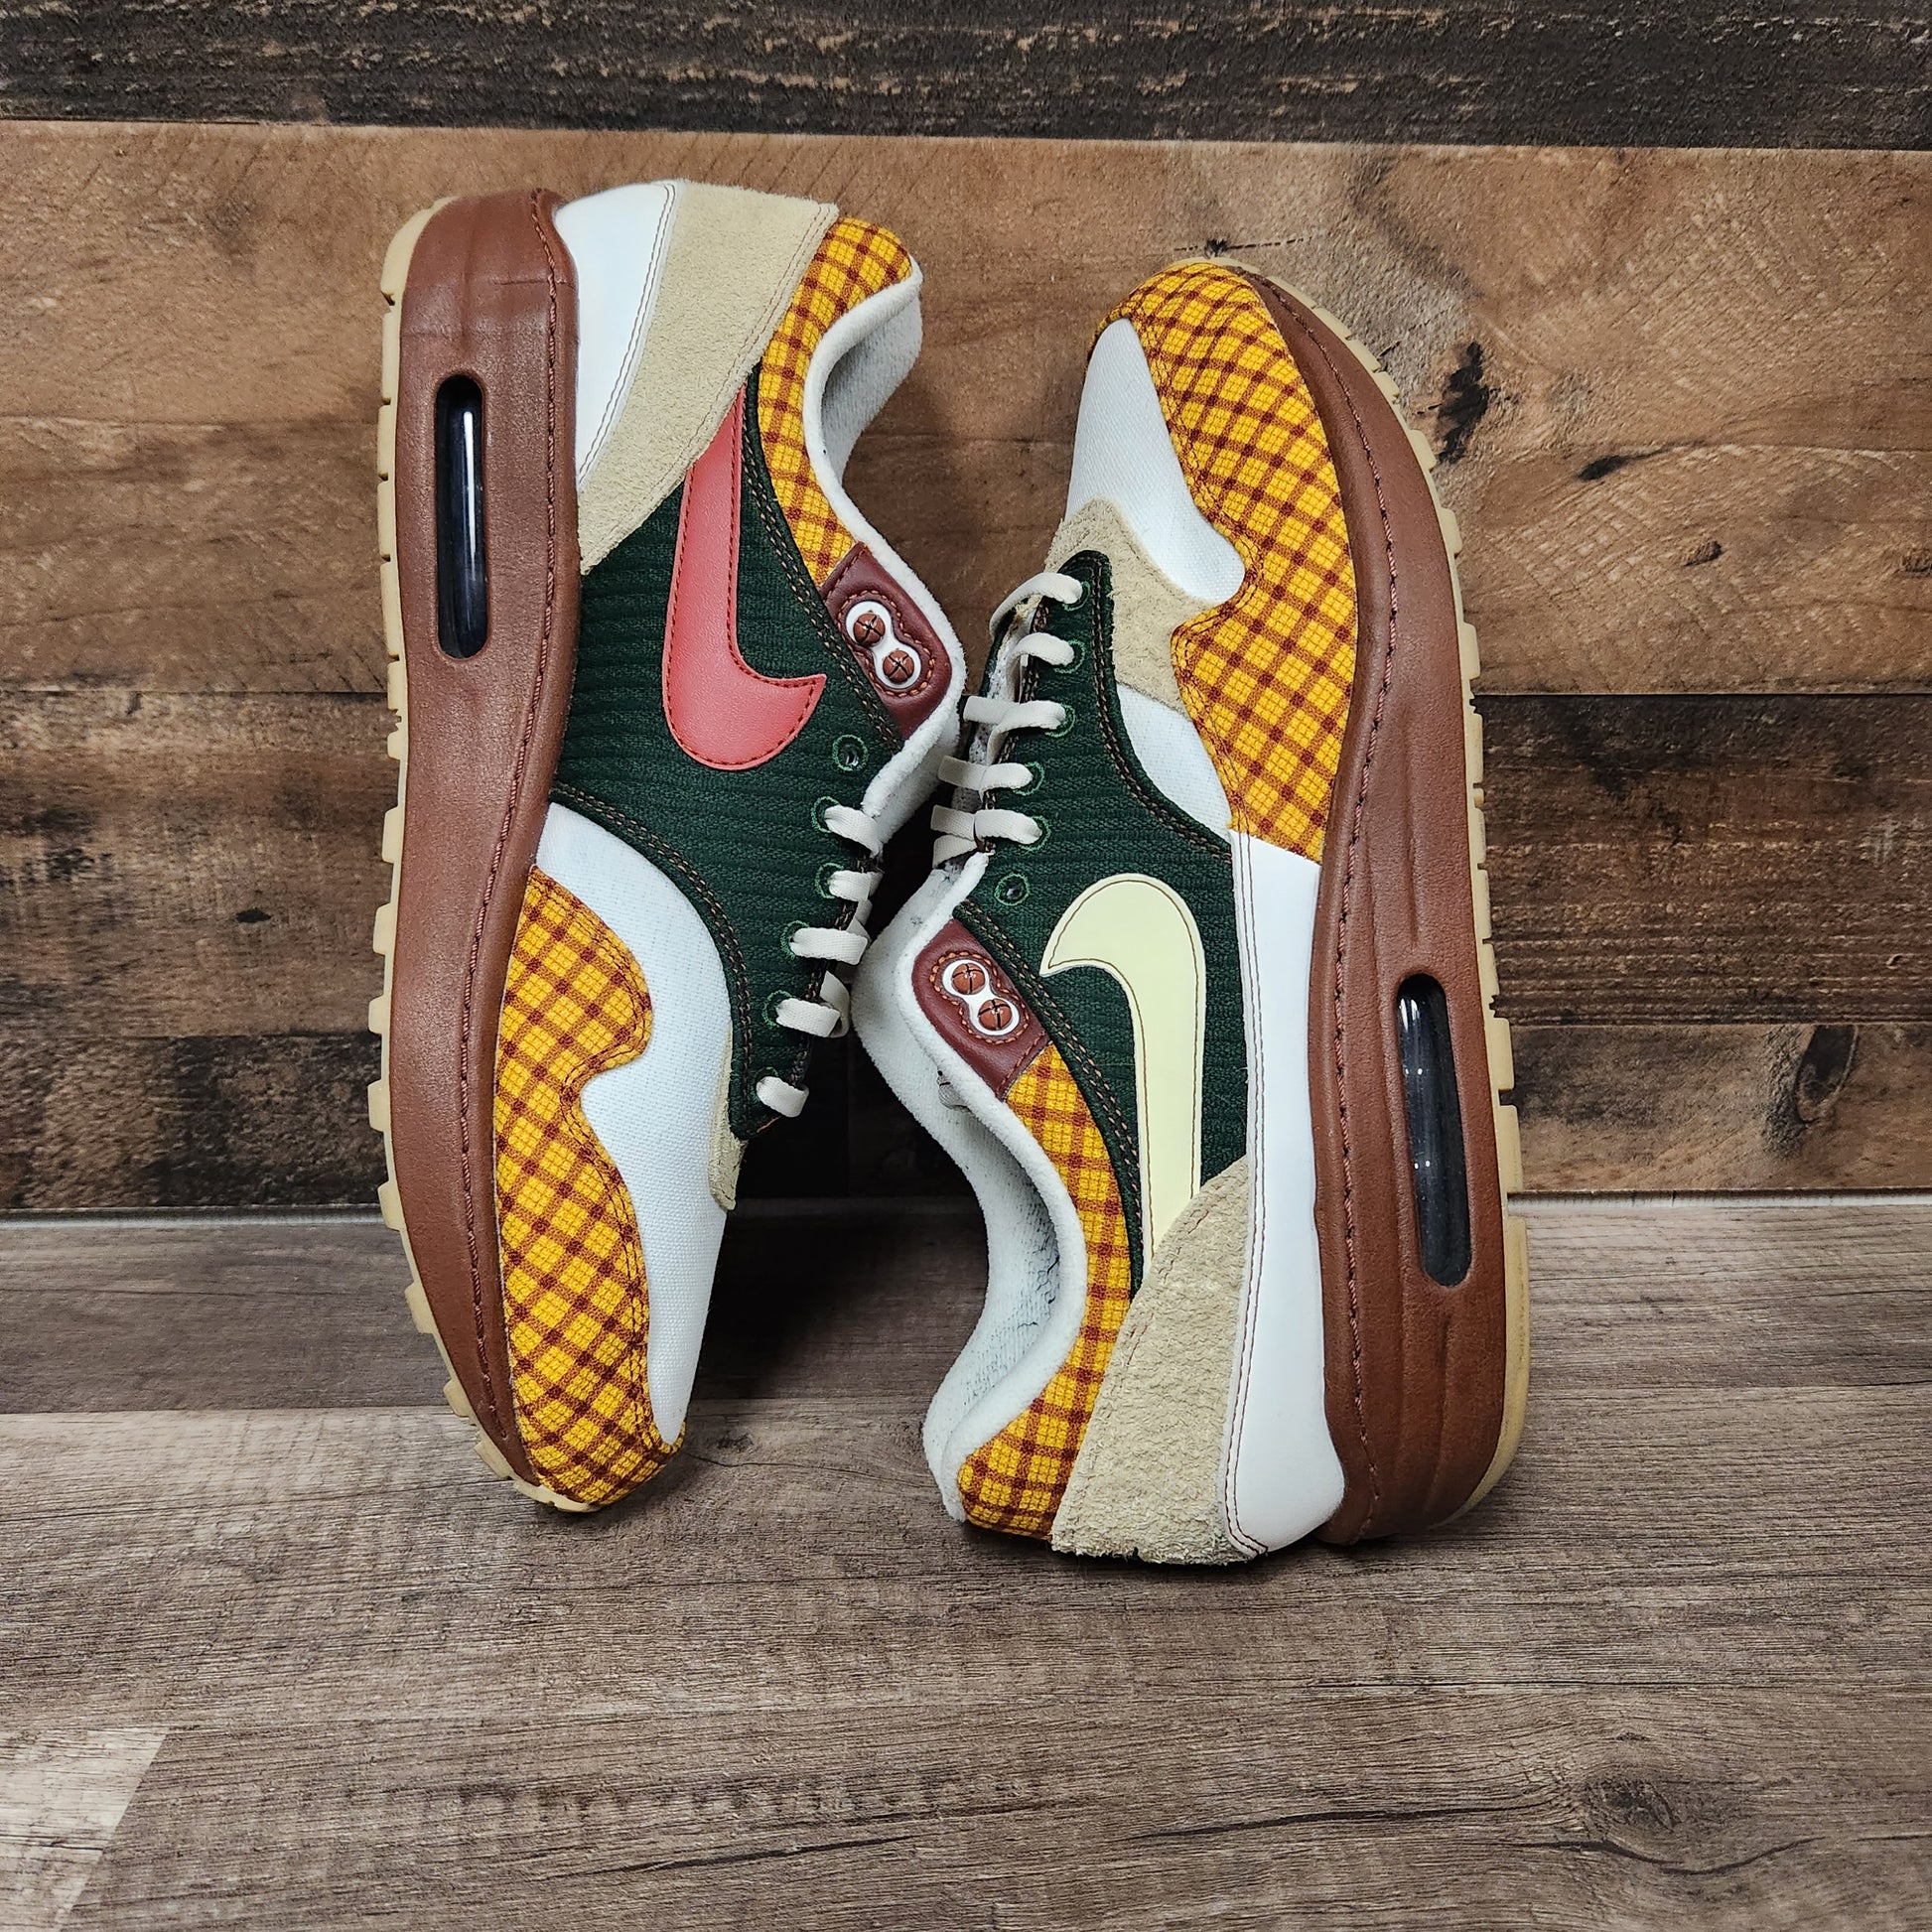 Nike Air Max 1 Missing Link Susan – Yesterday's